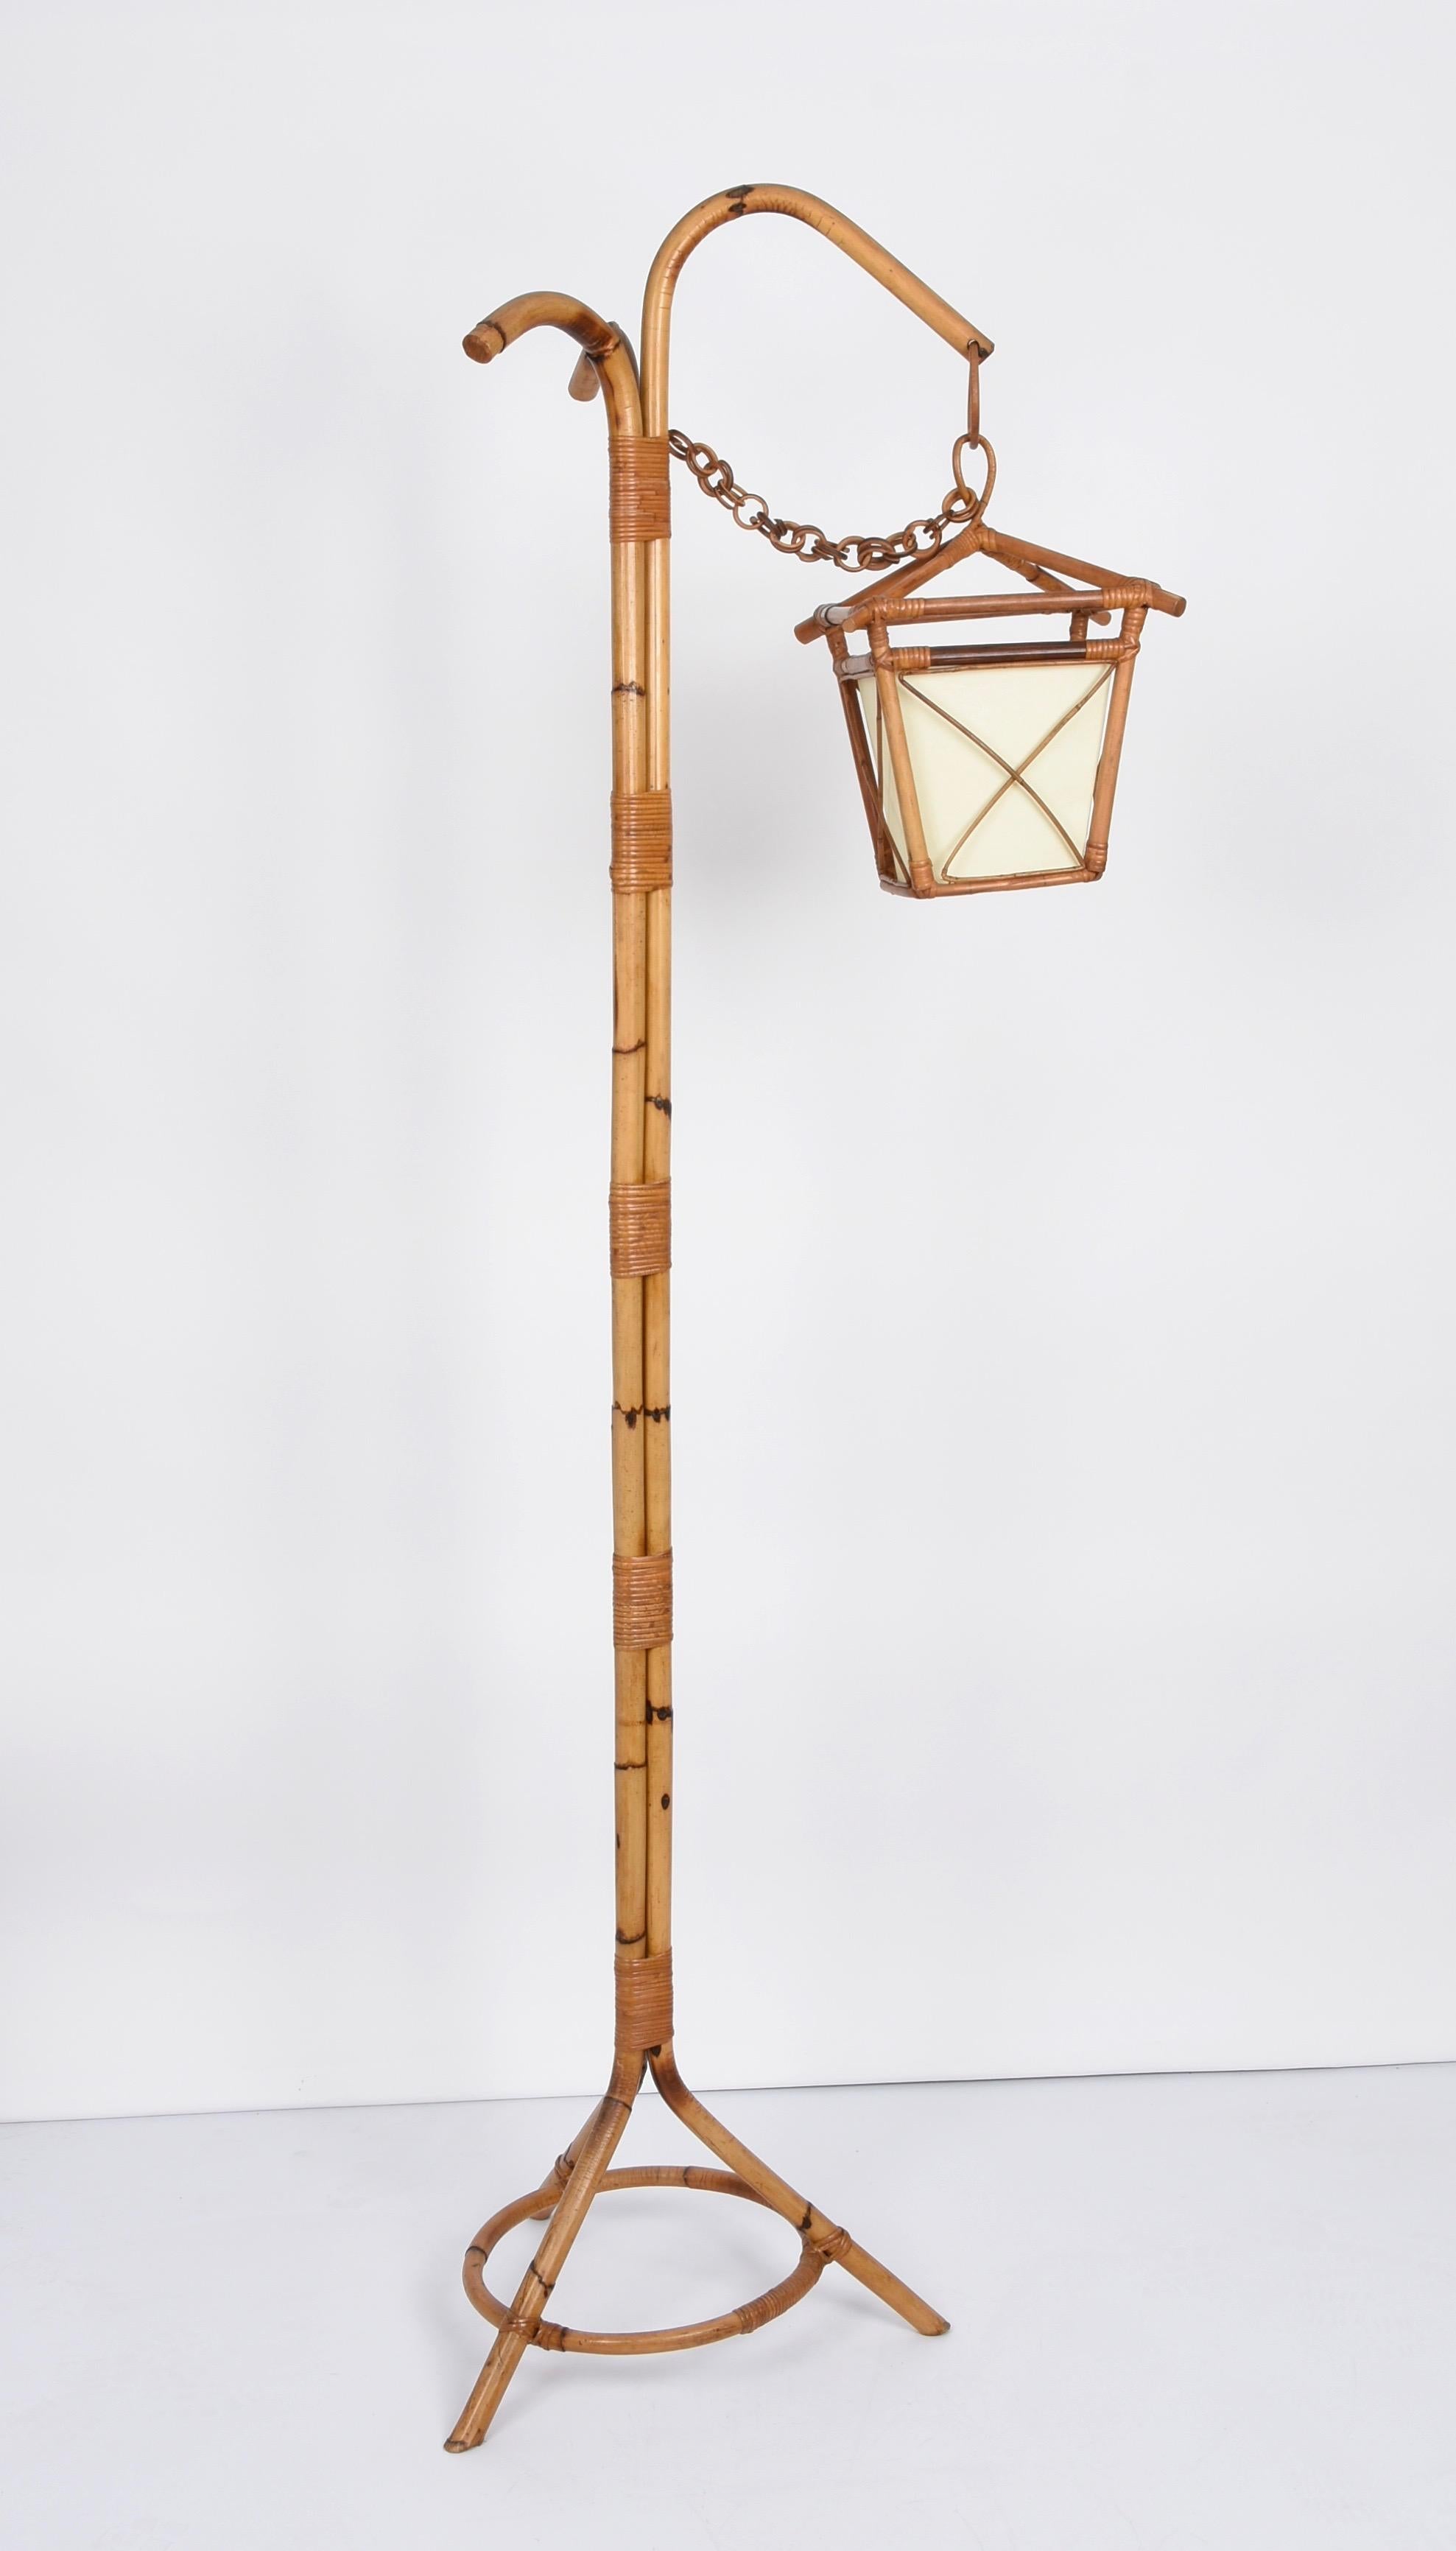 Midcentury Bamboo and Rattan Italian Floor Lamp with Tripod Base, 1950s For Sale 10